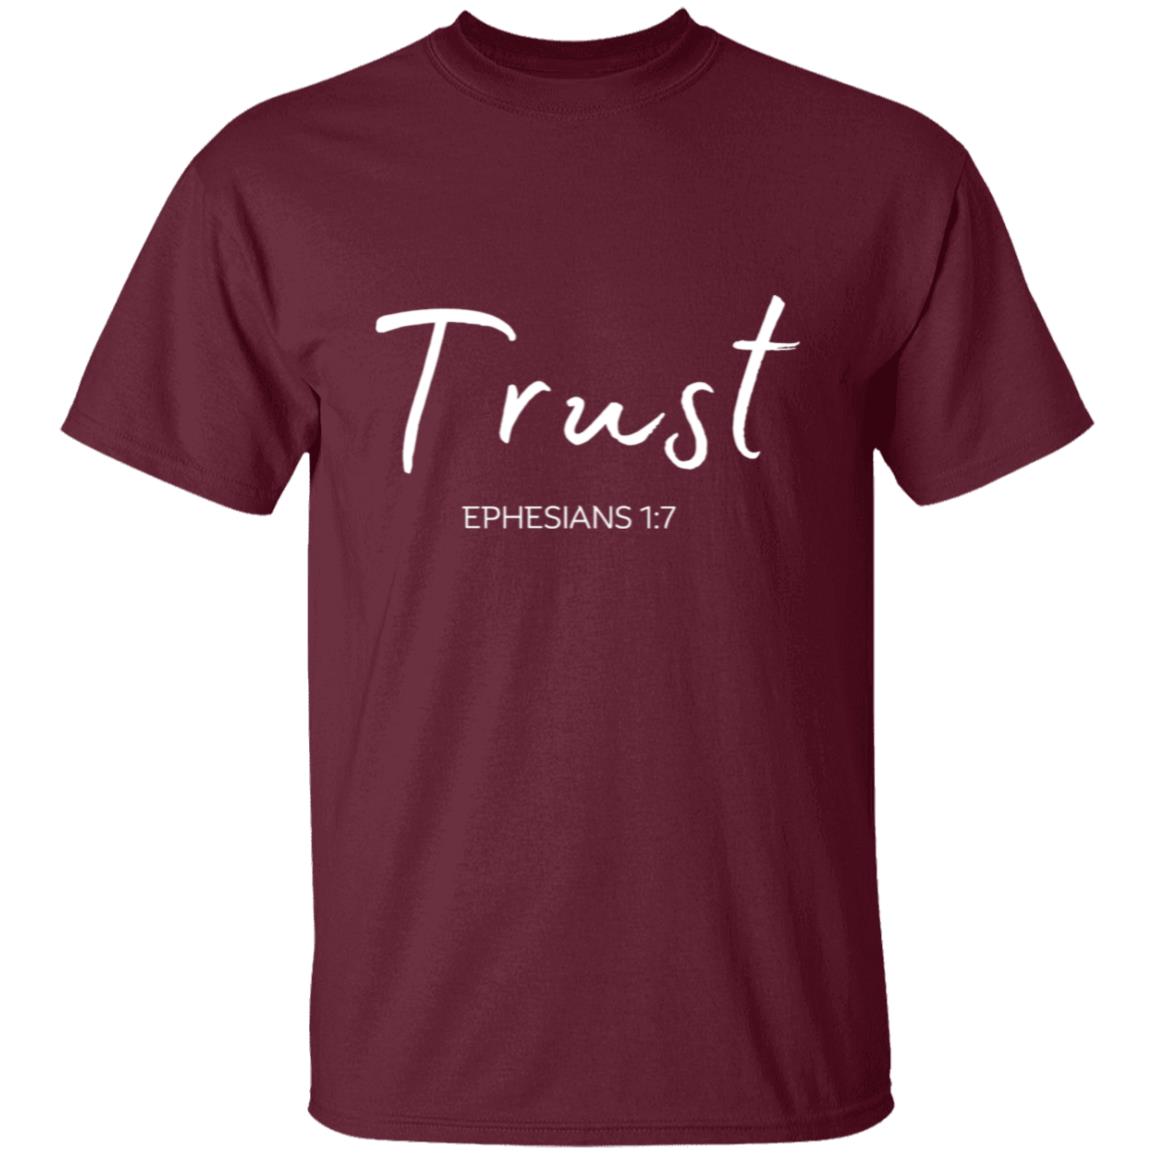 Get trendy with Trust (Ephesians 1:7)T-Shirt: Words of Faith Series (white text) - T-Shirts available at Good Gift Company. Grab yours for $21.95 today!